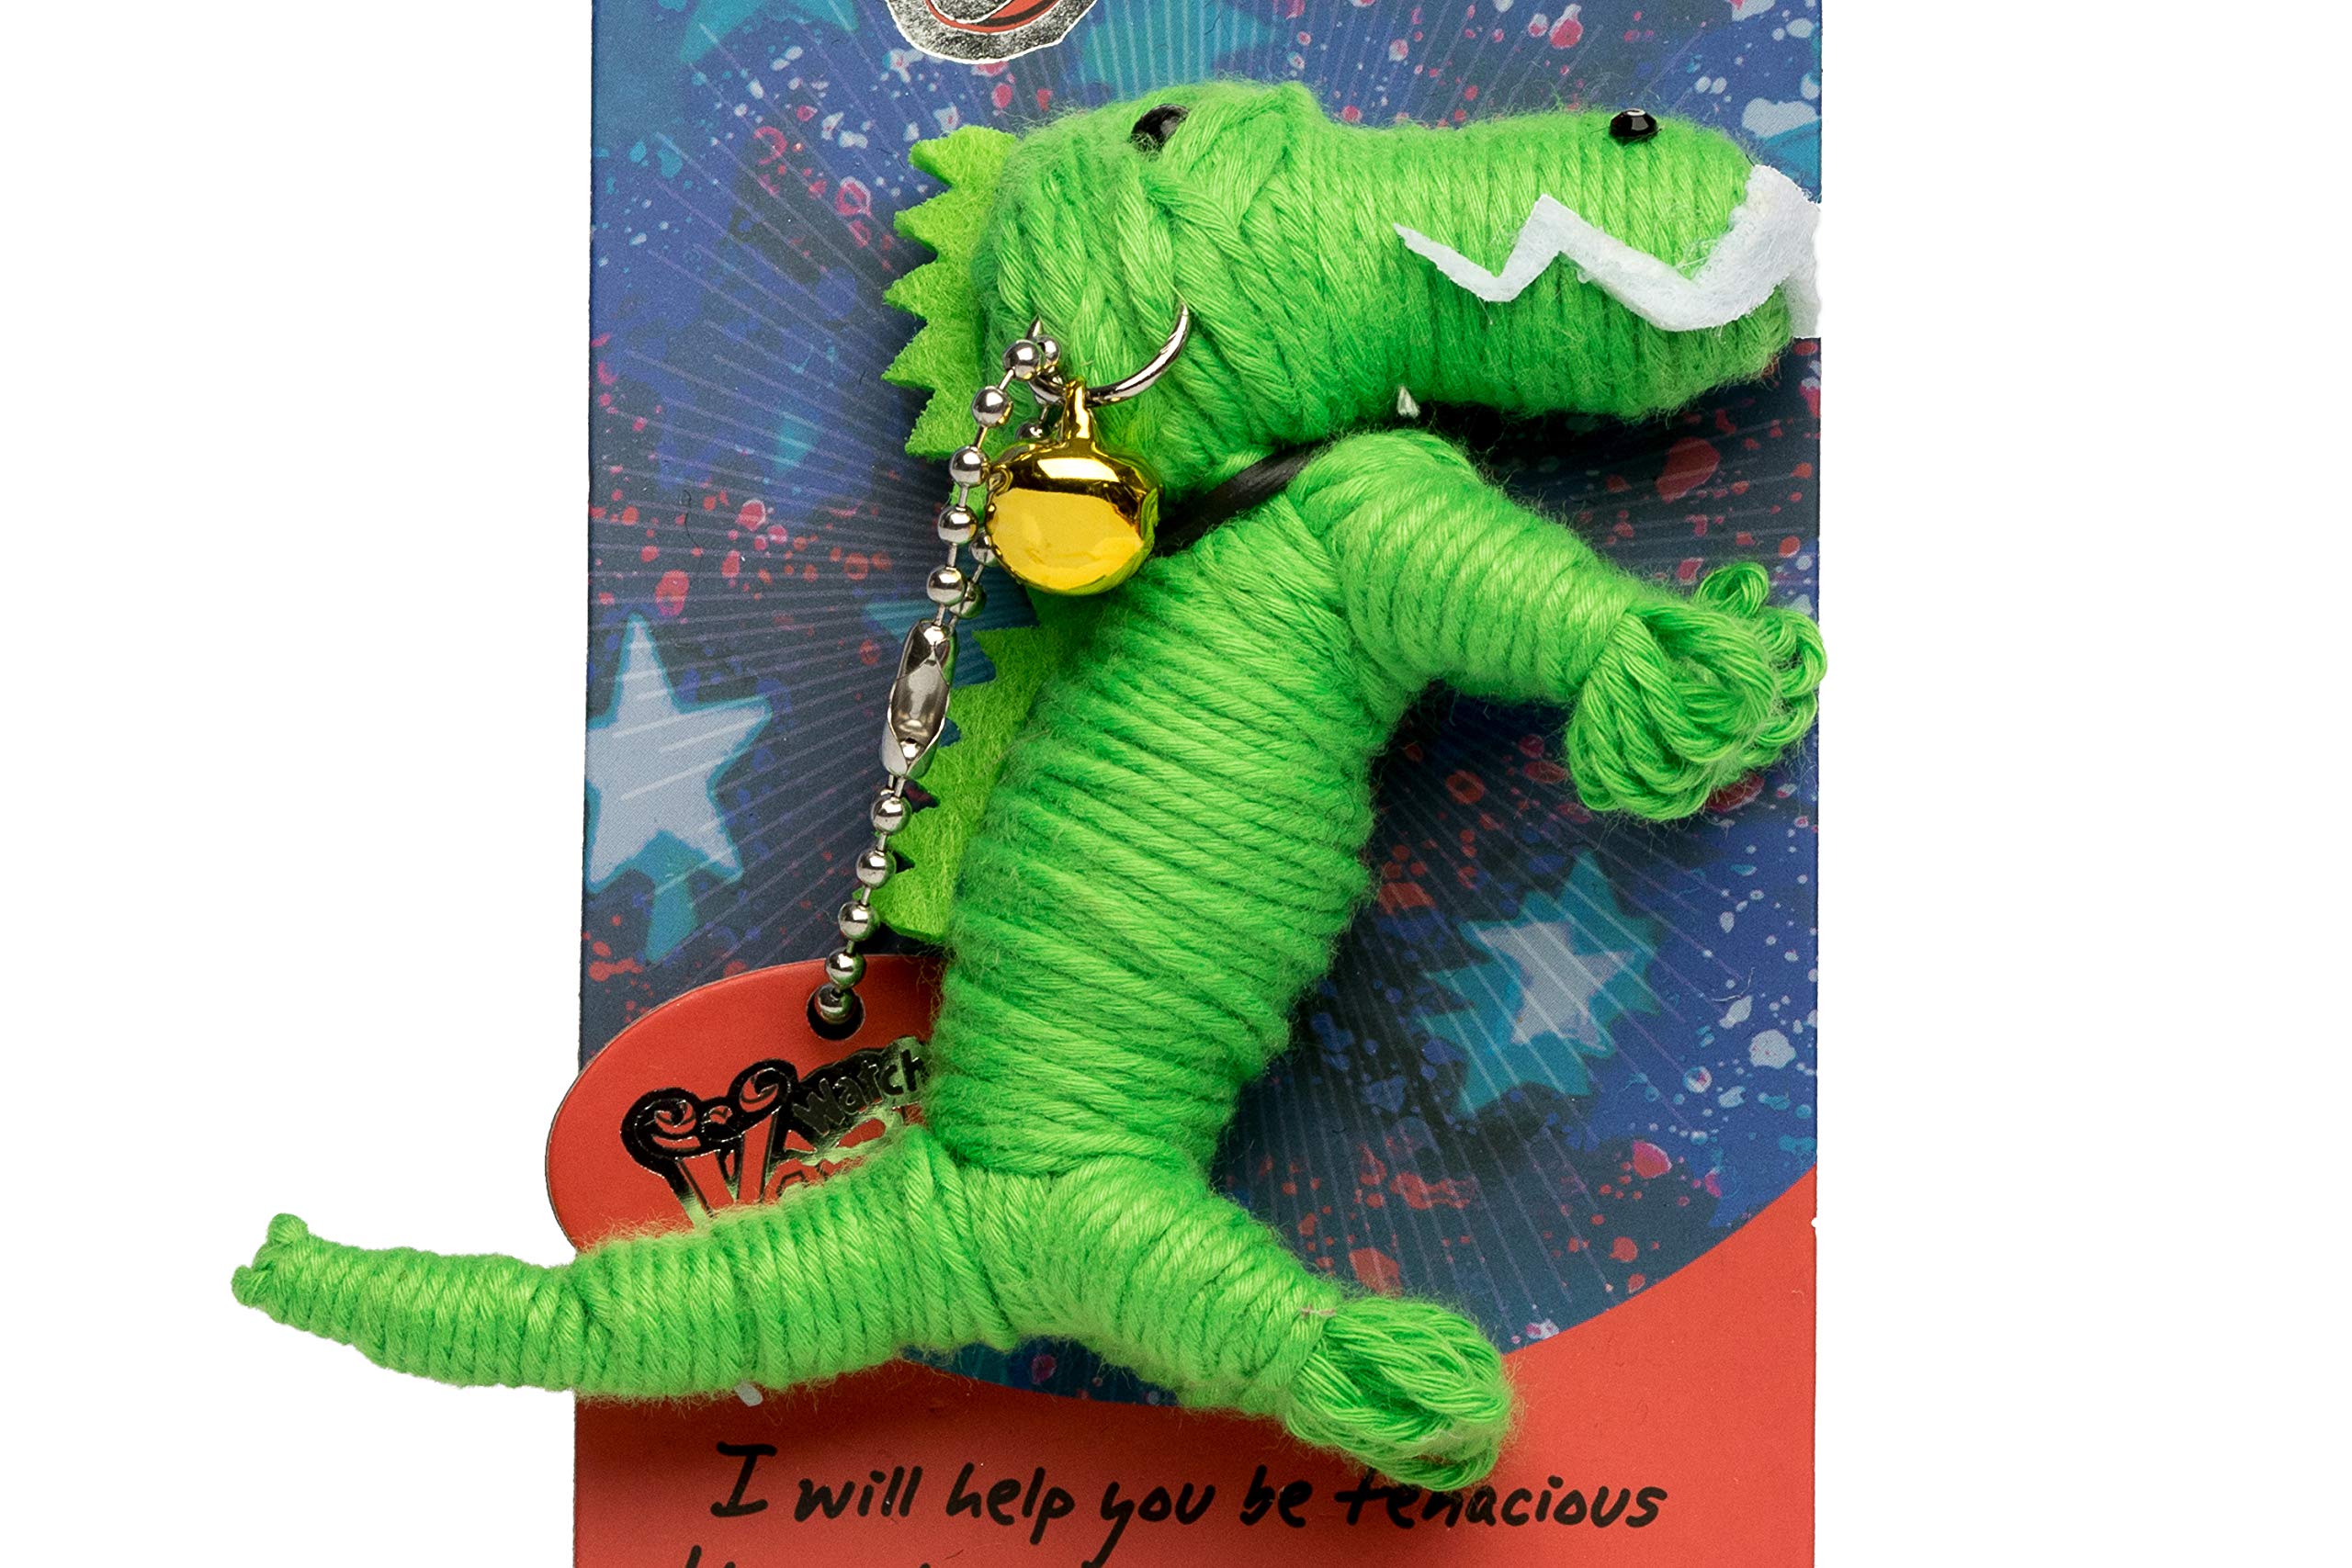 Watchover Voodoo - String Voodoo Doll Keychain – Novelty Voodoo Doll for Bag, Luggage or Car Mirror - Gator Buddy Voodoo Keychain, 5 inches